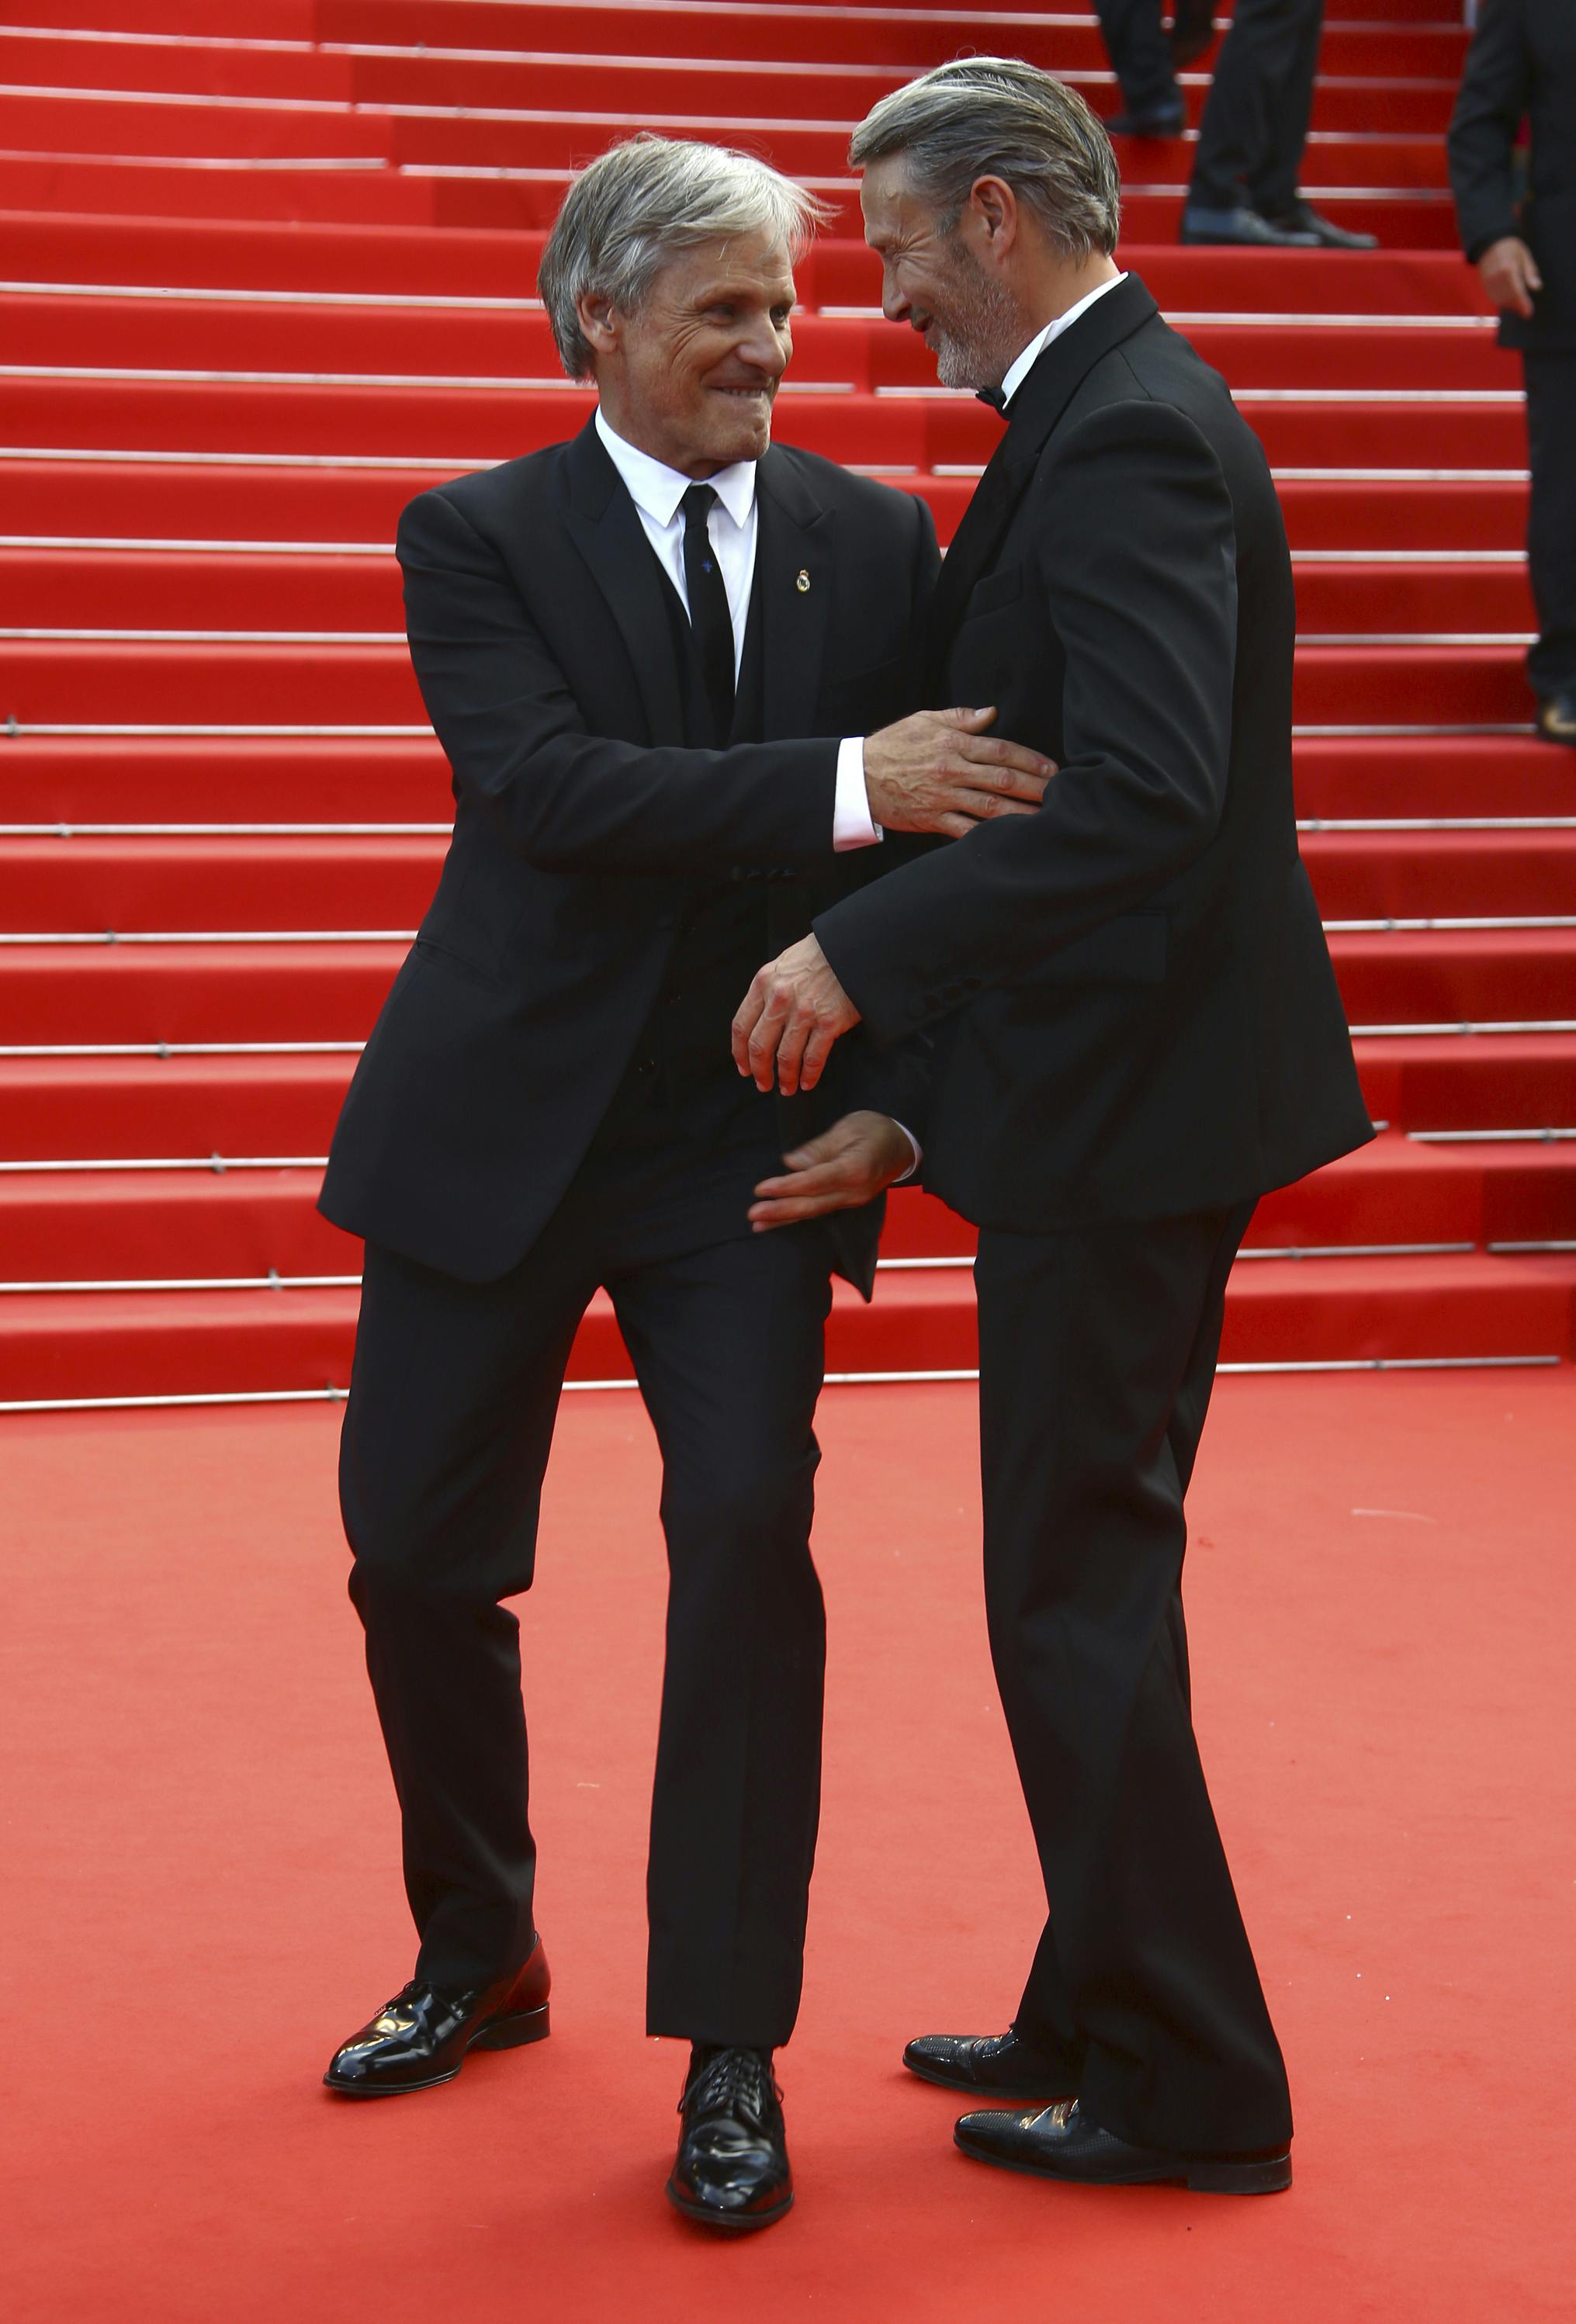 Viggo Mortensen, left, and Mads Mikkelsen pose for photographers upon arrival at the 75th anniversary celebration of the Cannes film festival and the premiere of the film 'The Innocent' at the 75th international film festival, Cannes, southern France, Tuesday, May 24, 2022. (Photo by Joel C Ryan/Invision/AP)